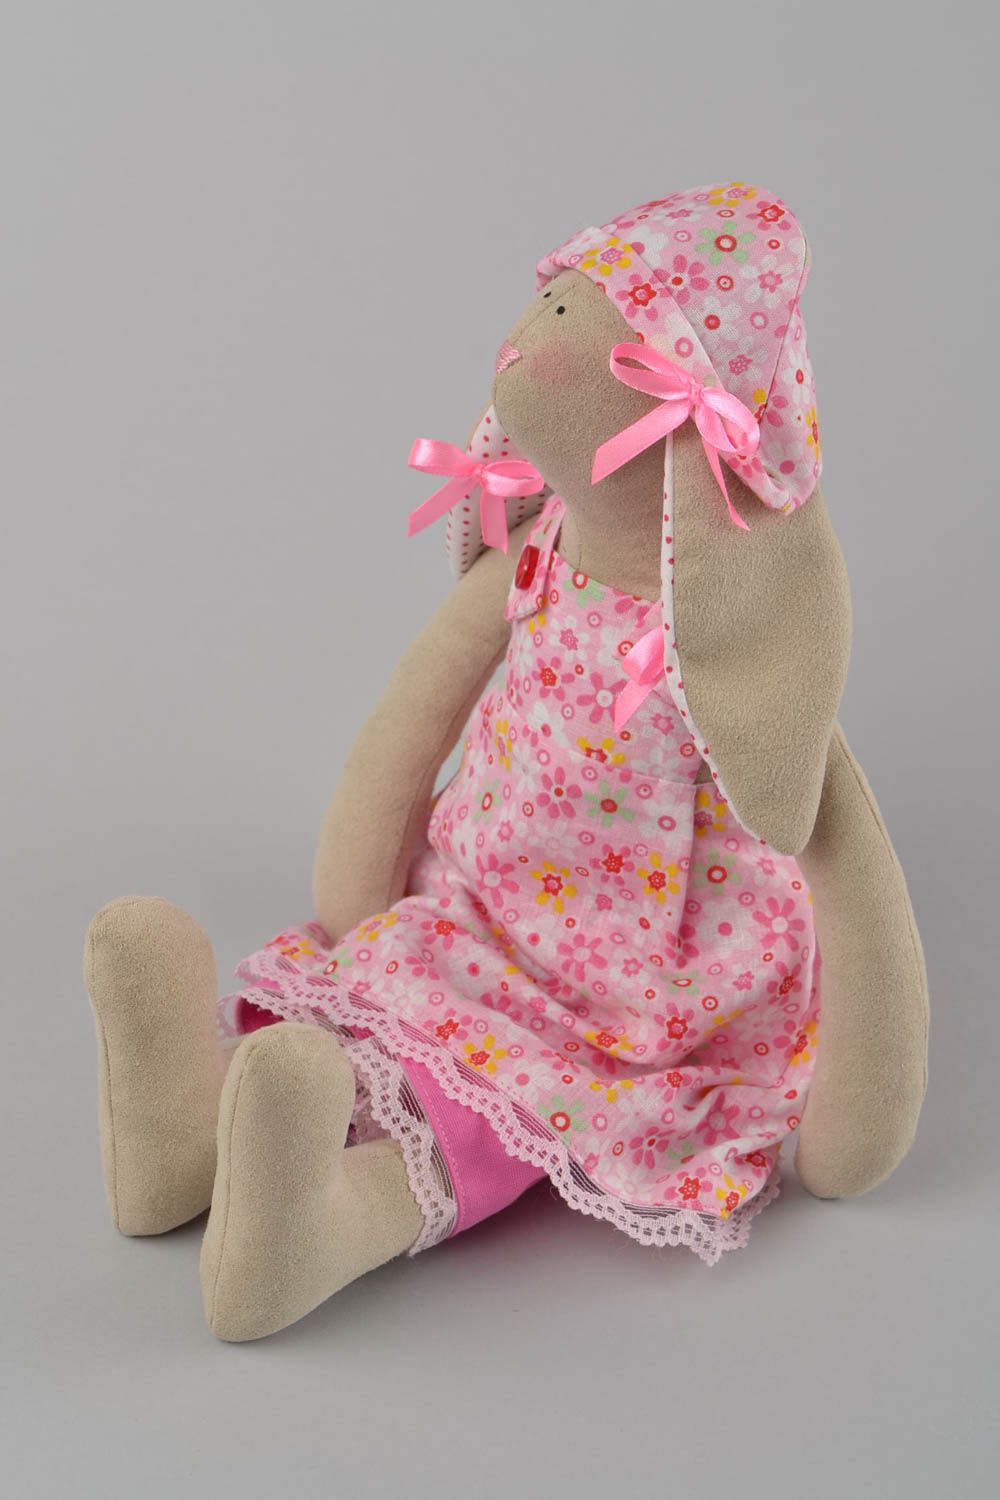 Handmade designer fabric soft toy rabbit in pink dress and hat for interior  photo 1